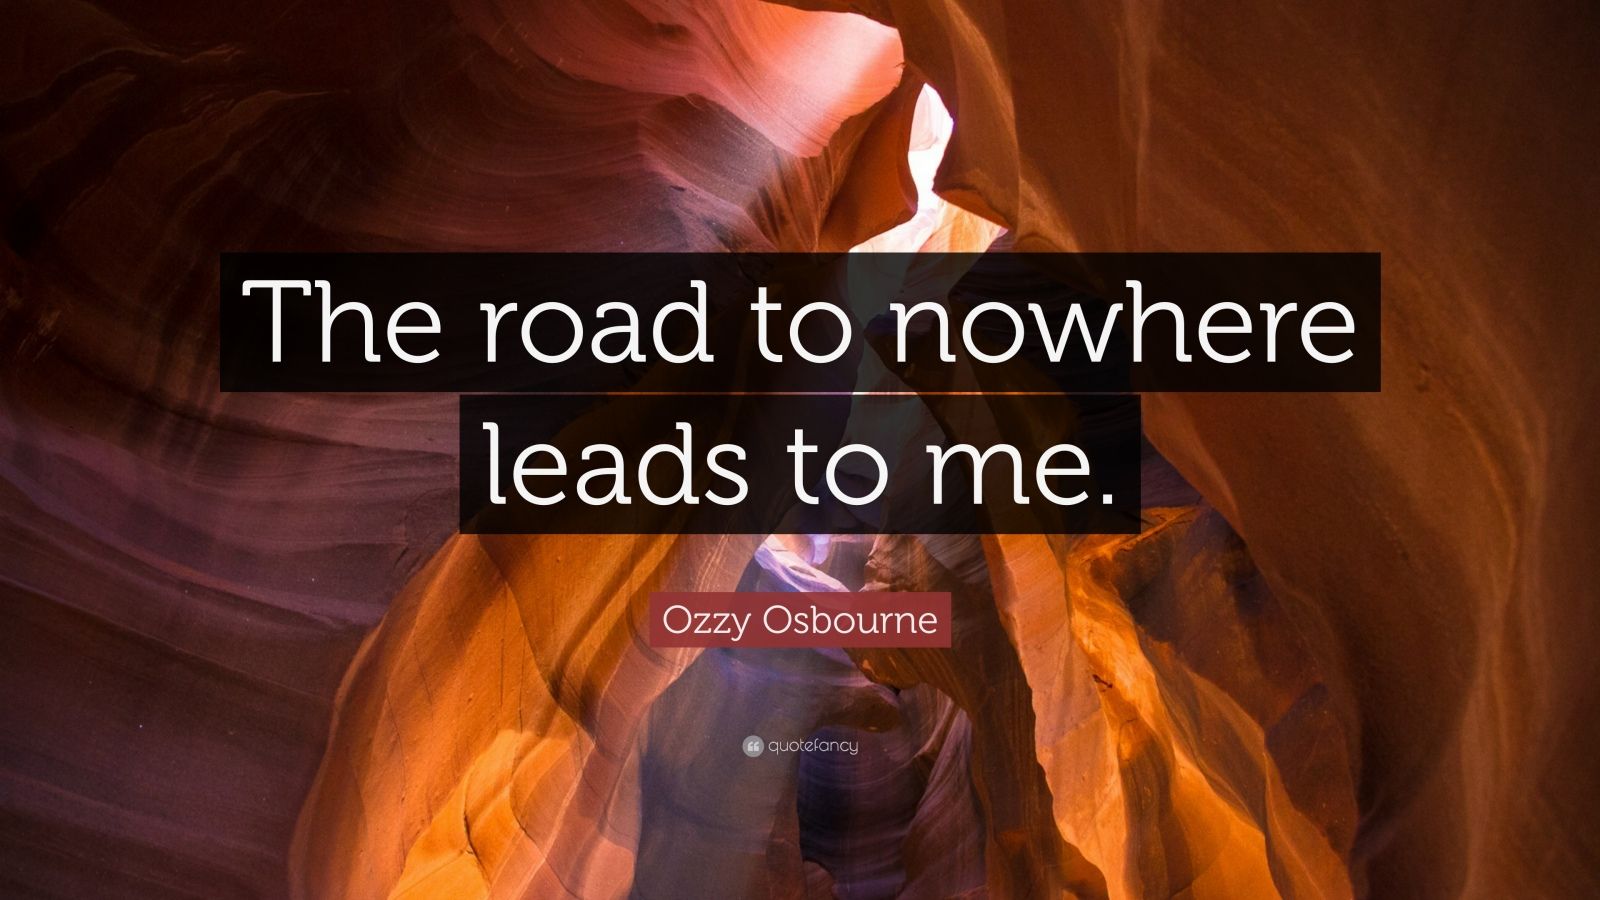 road to nowhere ozzy osbourne chords